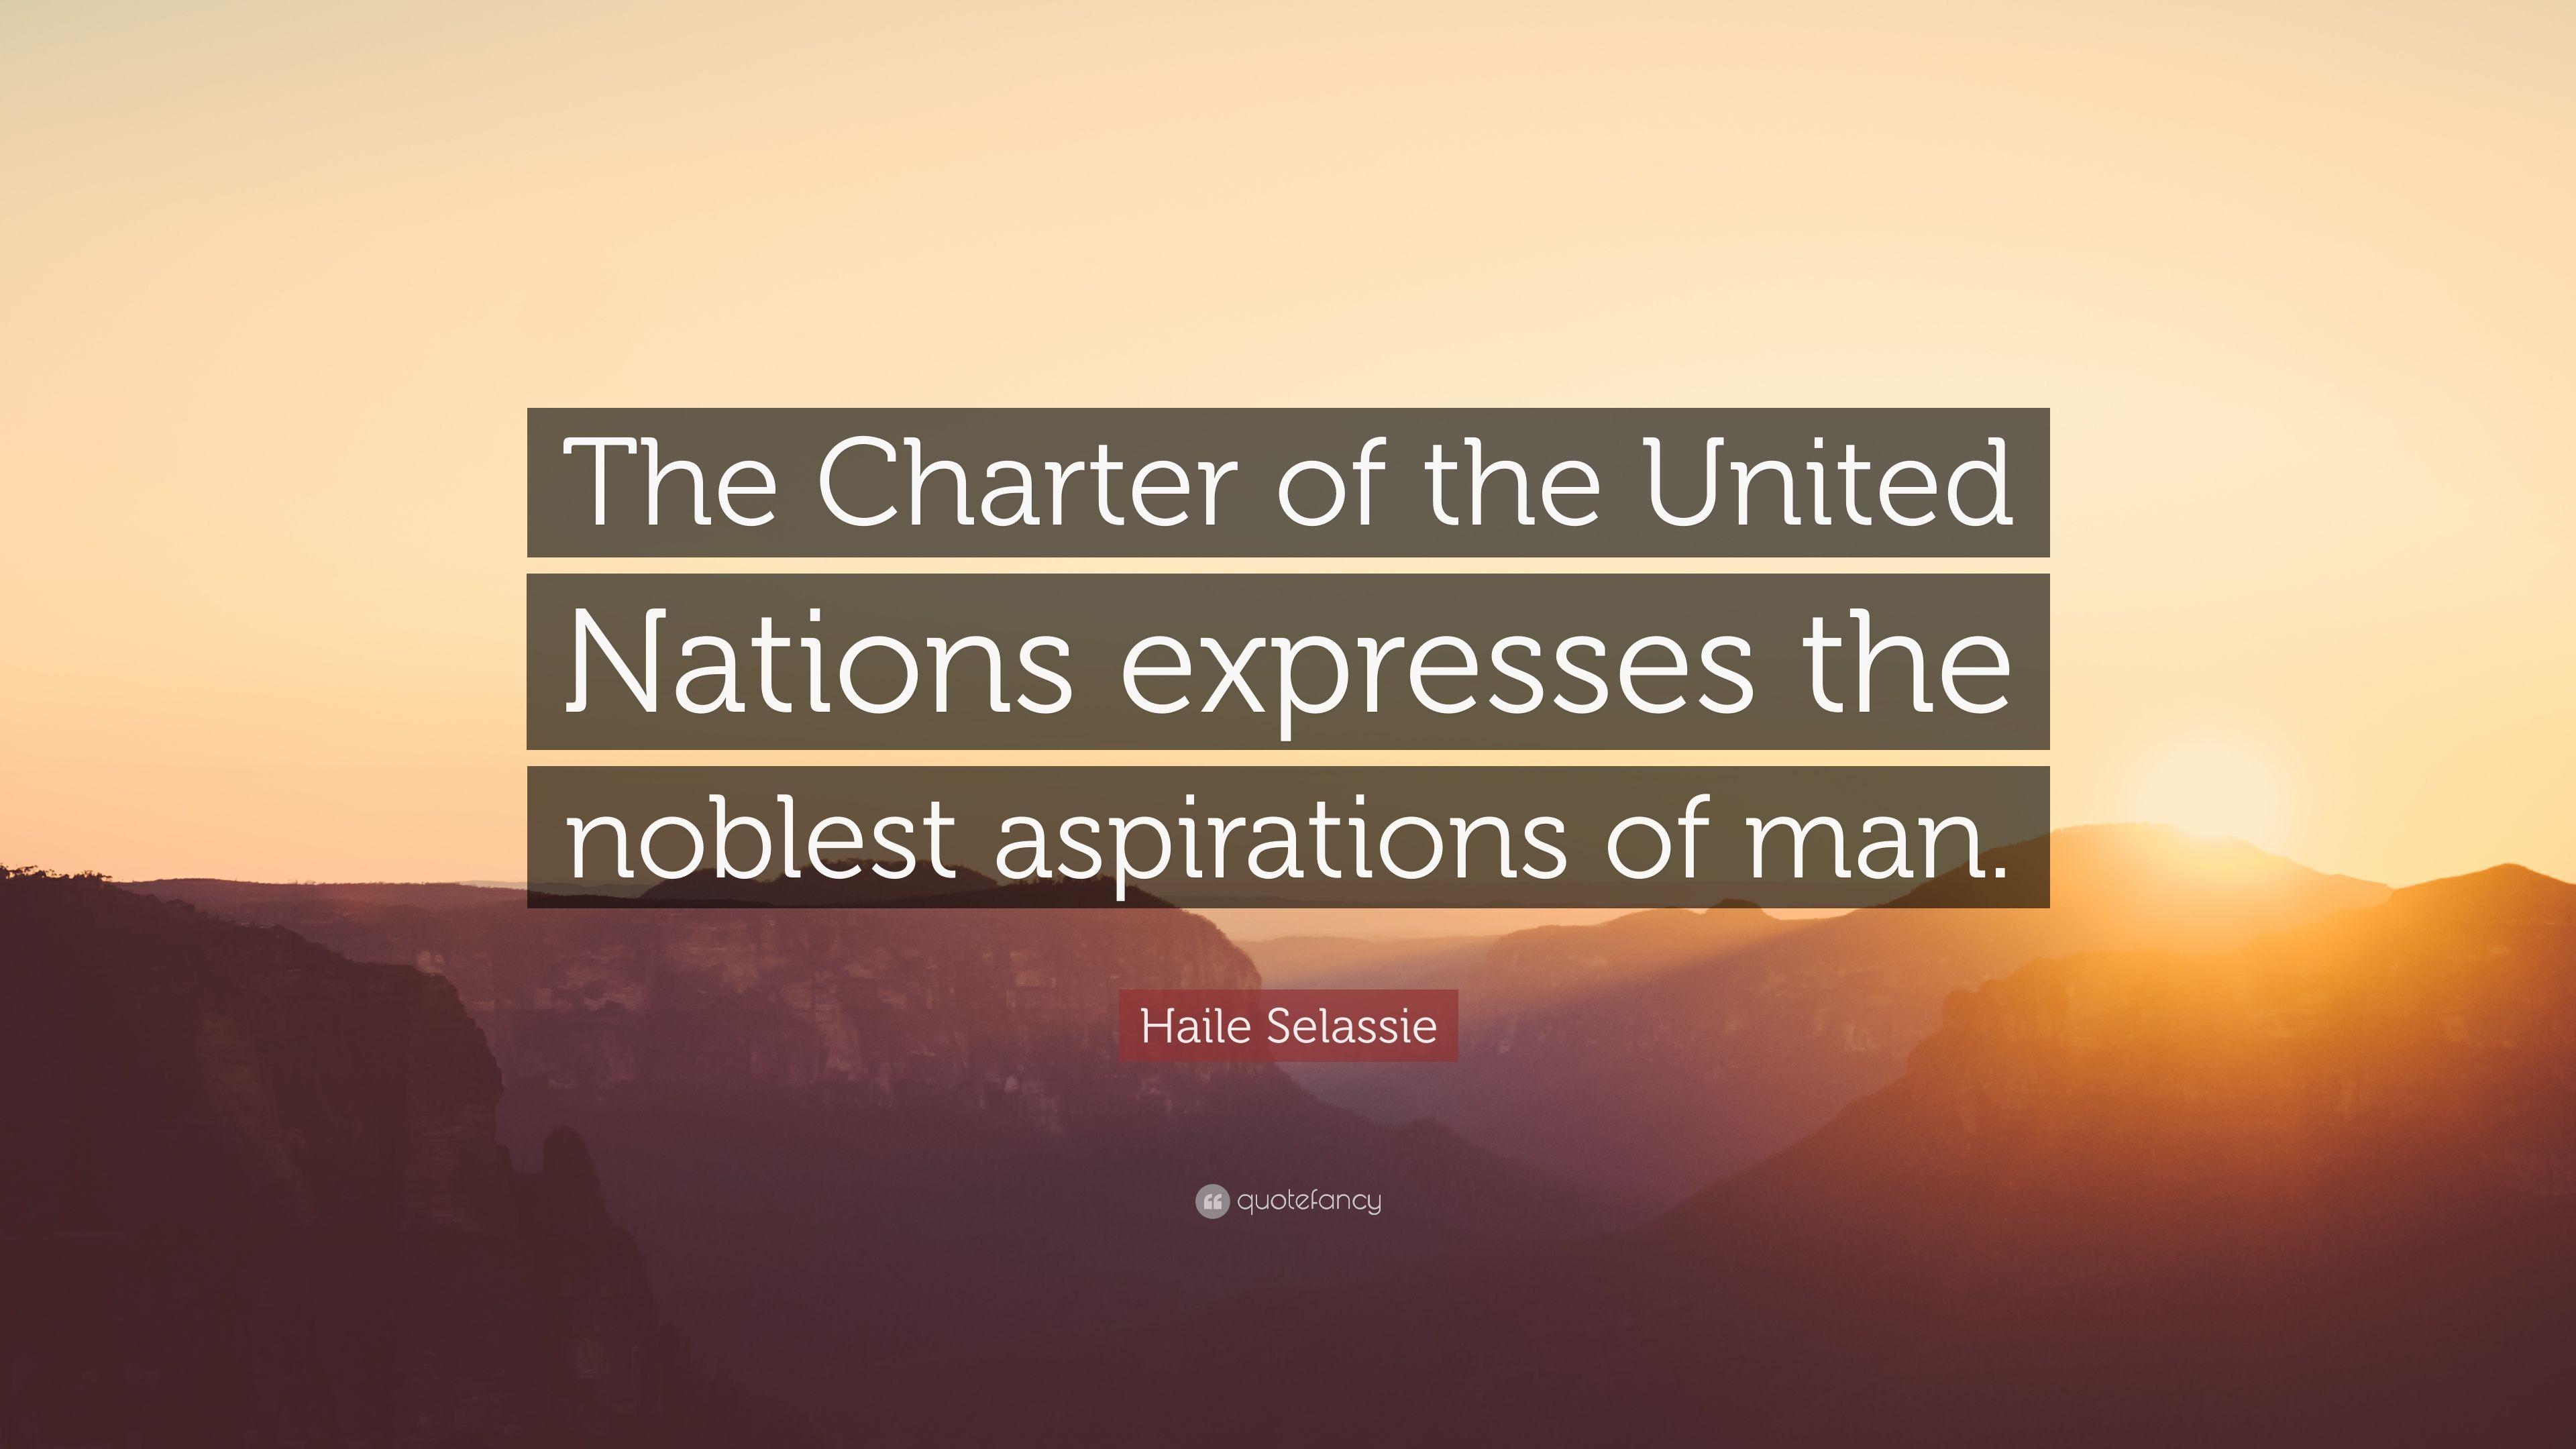 Haile Selassie Quote: “The Charter of the United Nations expresses